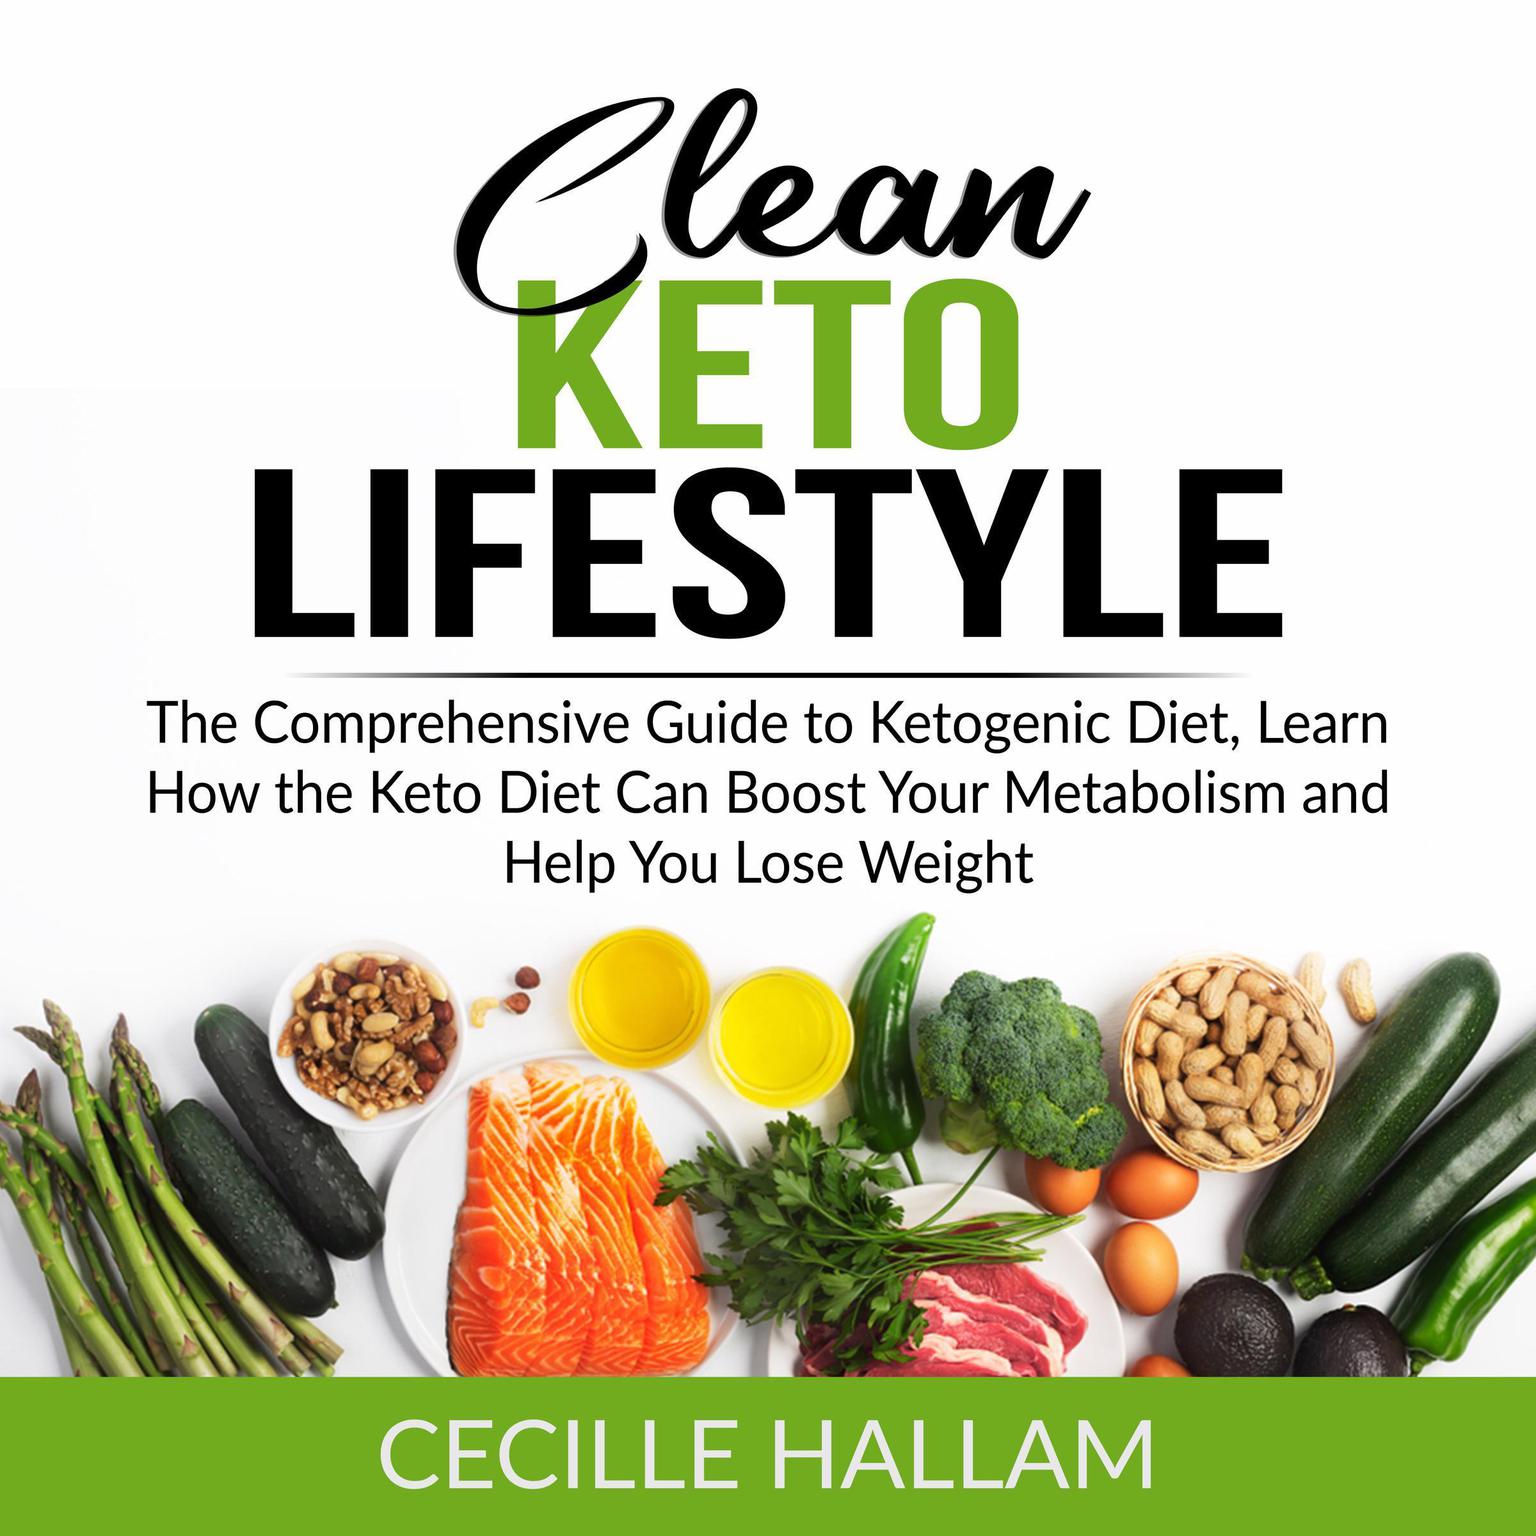 Clean Keto Lifestyle: The Comprehensive Guide to Ketogenic Diet, Learn How the Keto Diet Can Boost Your Metabolism and Help You Lose Weight  Audiobook, by Cecille Hallam